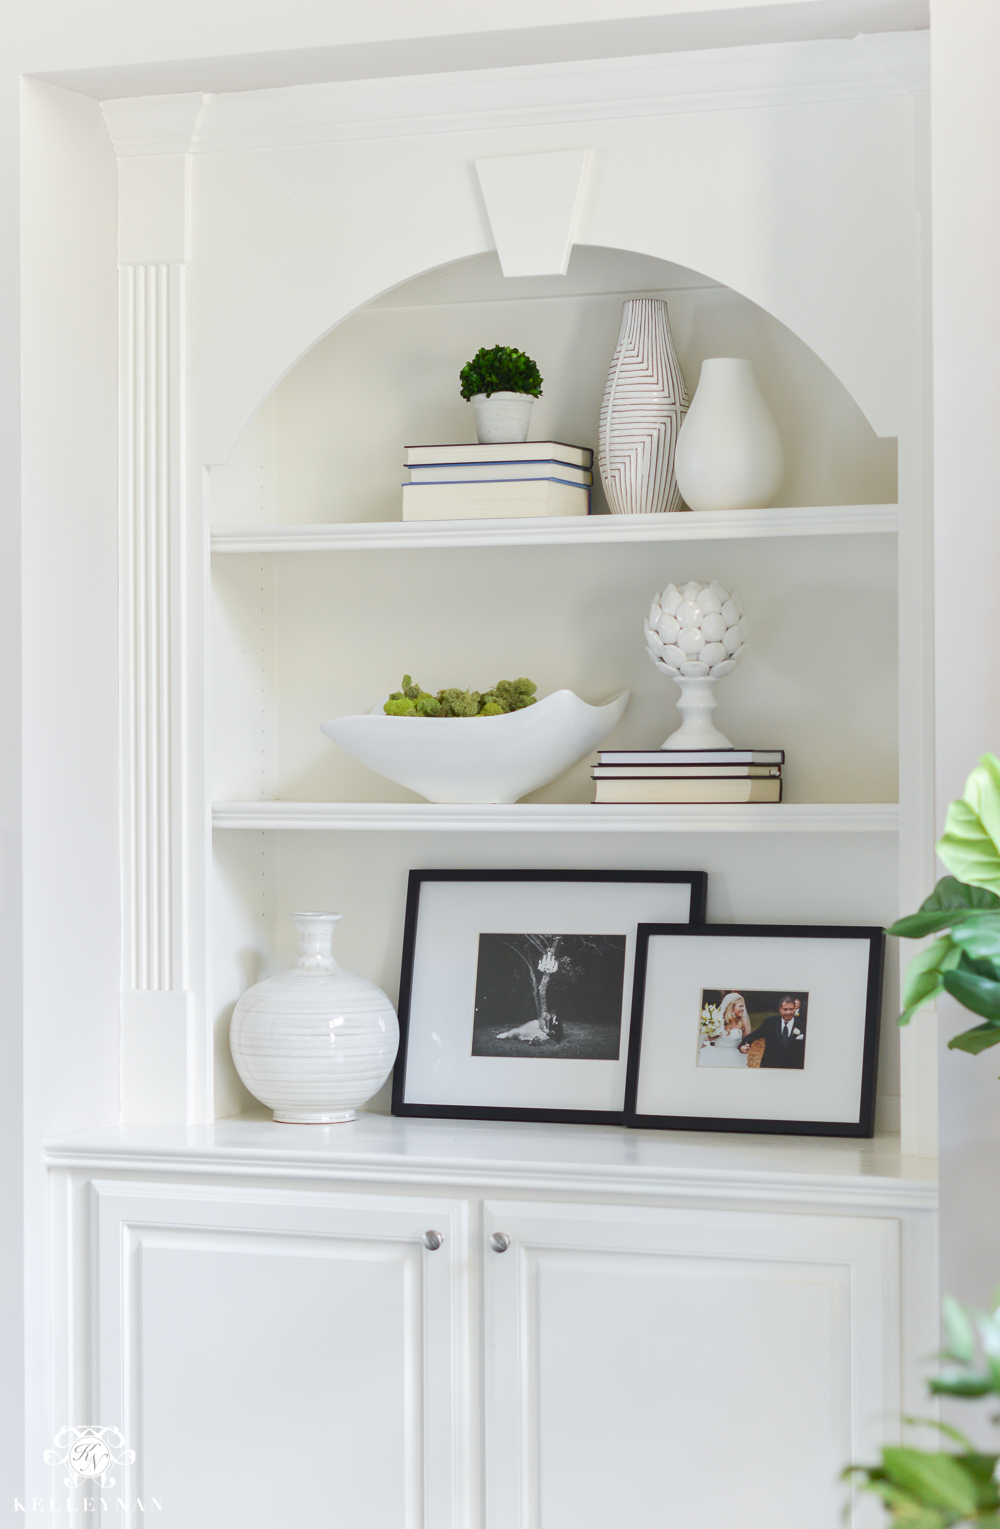 Shades of Summer Home Tour with Neutrals and Naturals- White Built-In Shelf Stylying